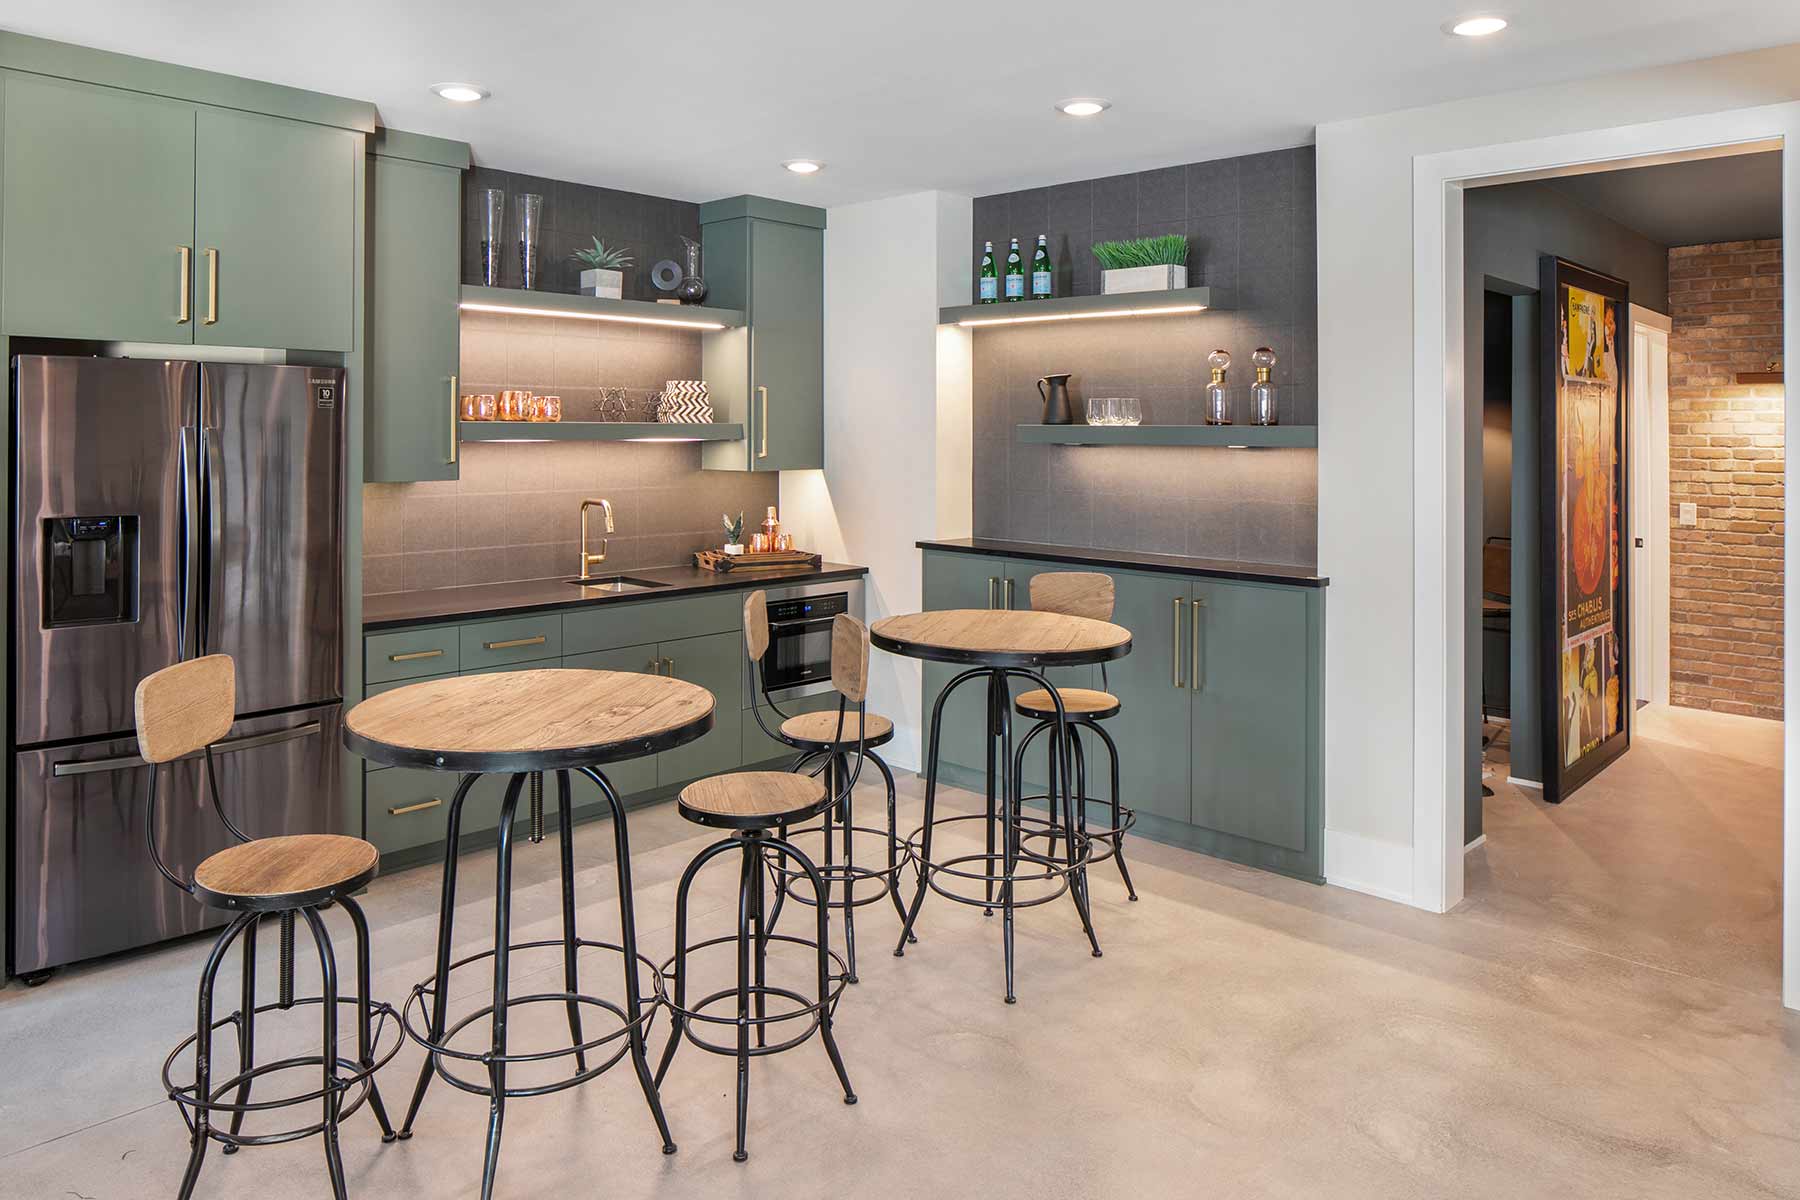 A kitchen with green cabinets and bar stools.